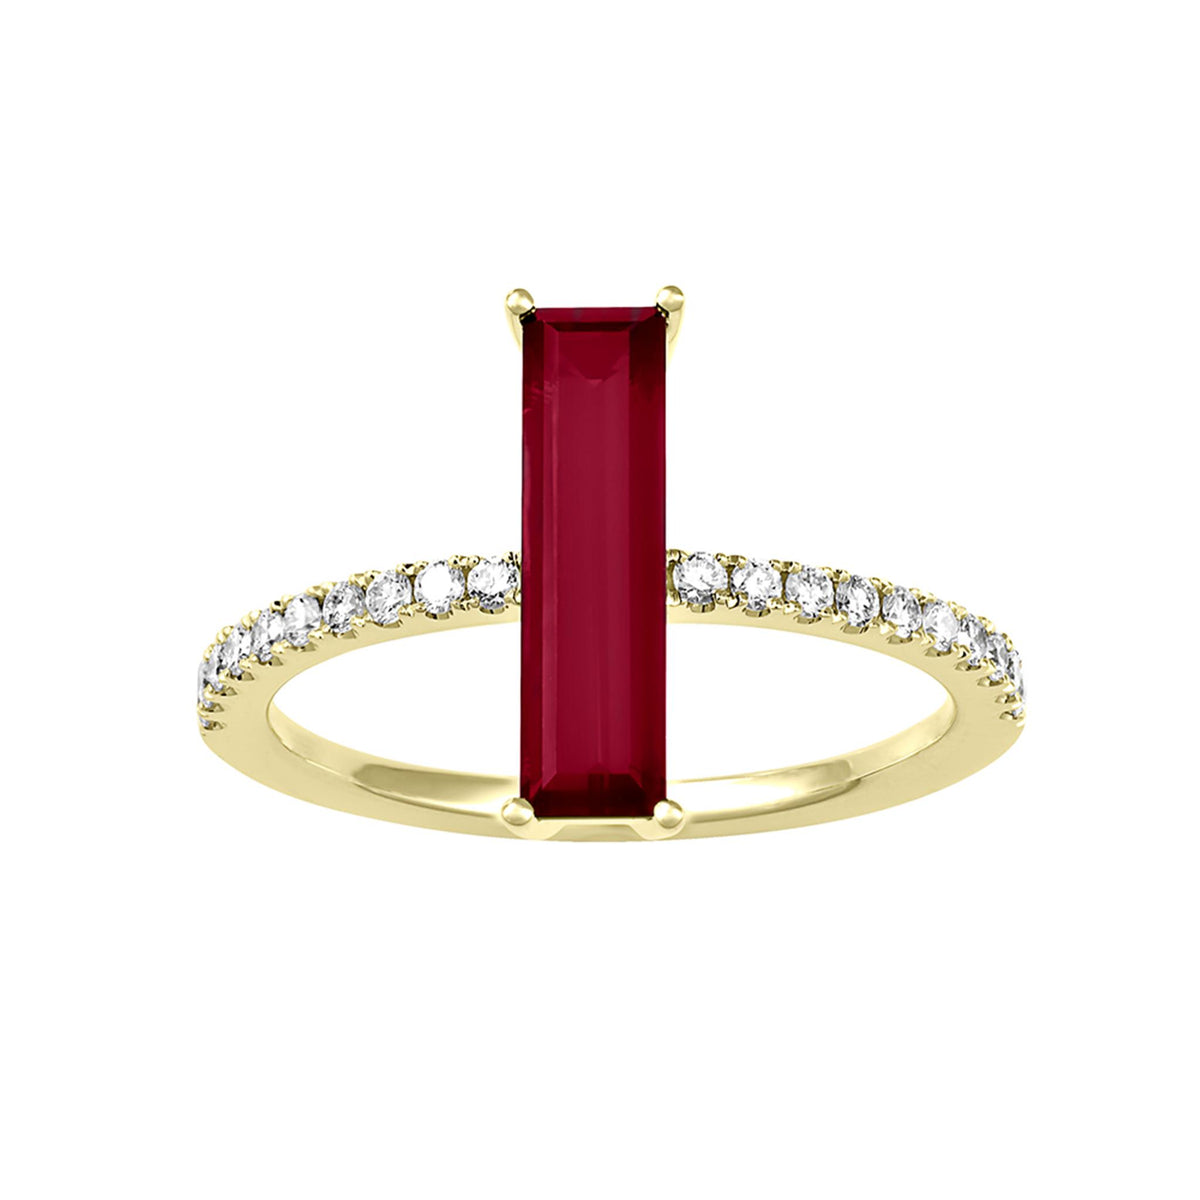 14Kt Yellow Gold Ring With 1.65ct Chatham Created Ruby